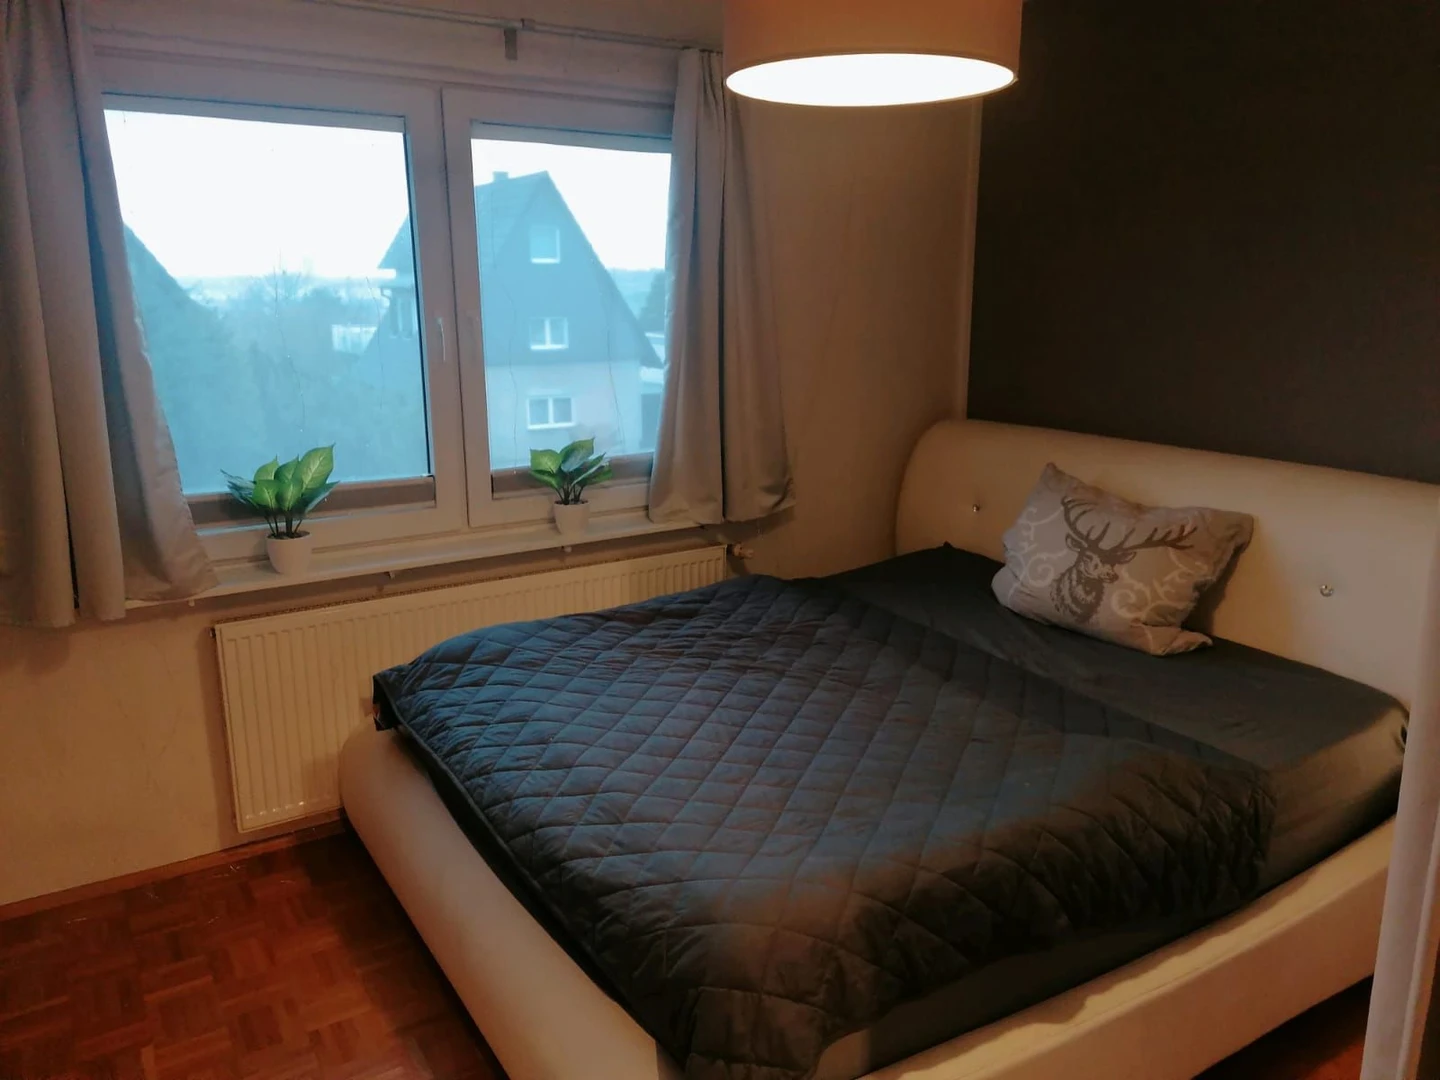 Renting rooms by the month in Dortmund